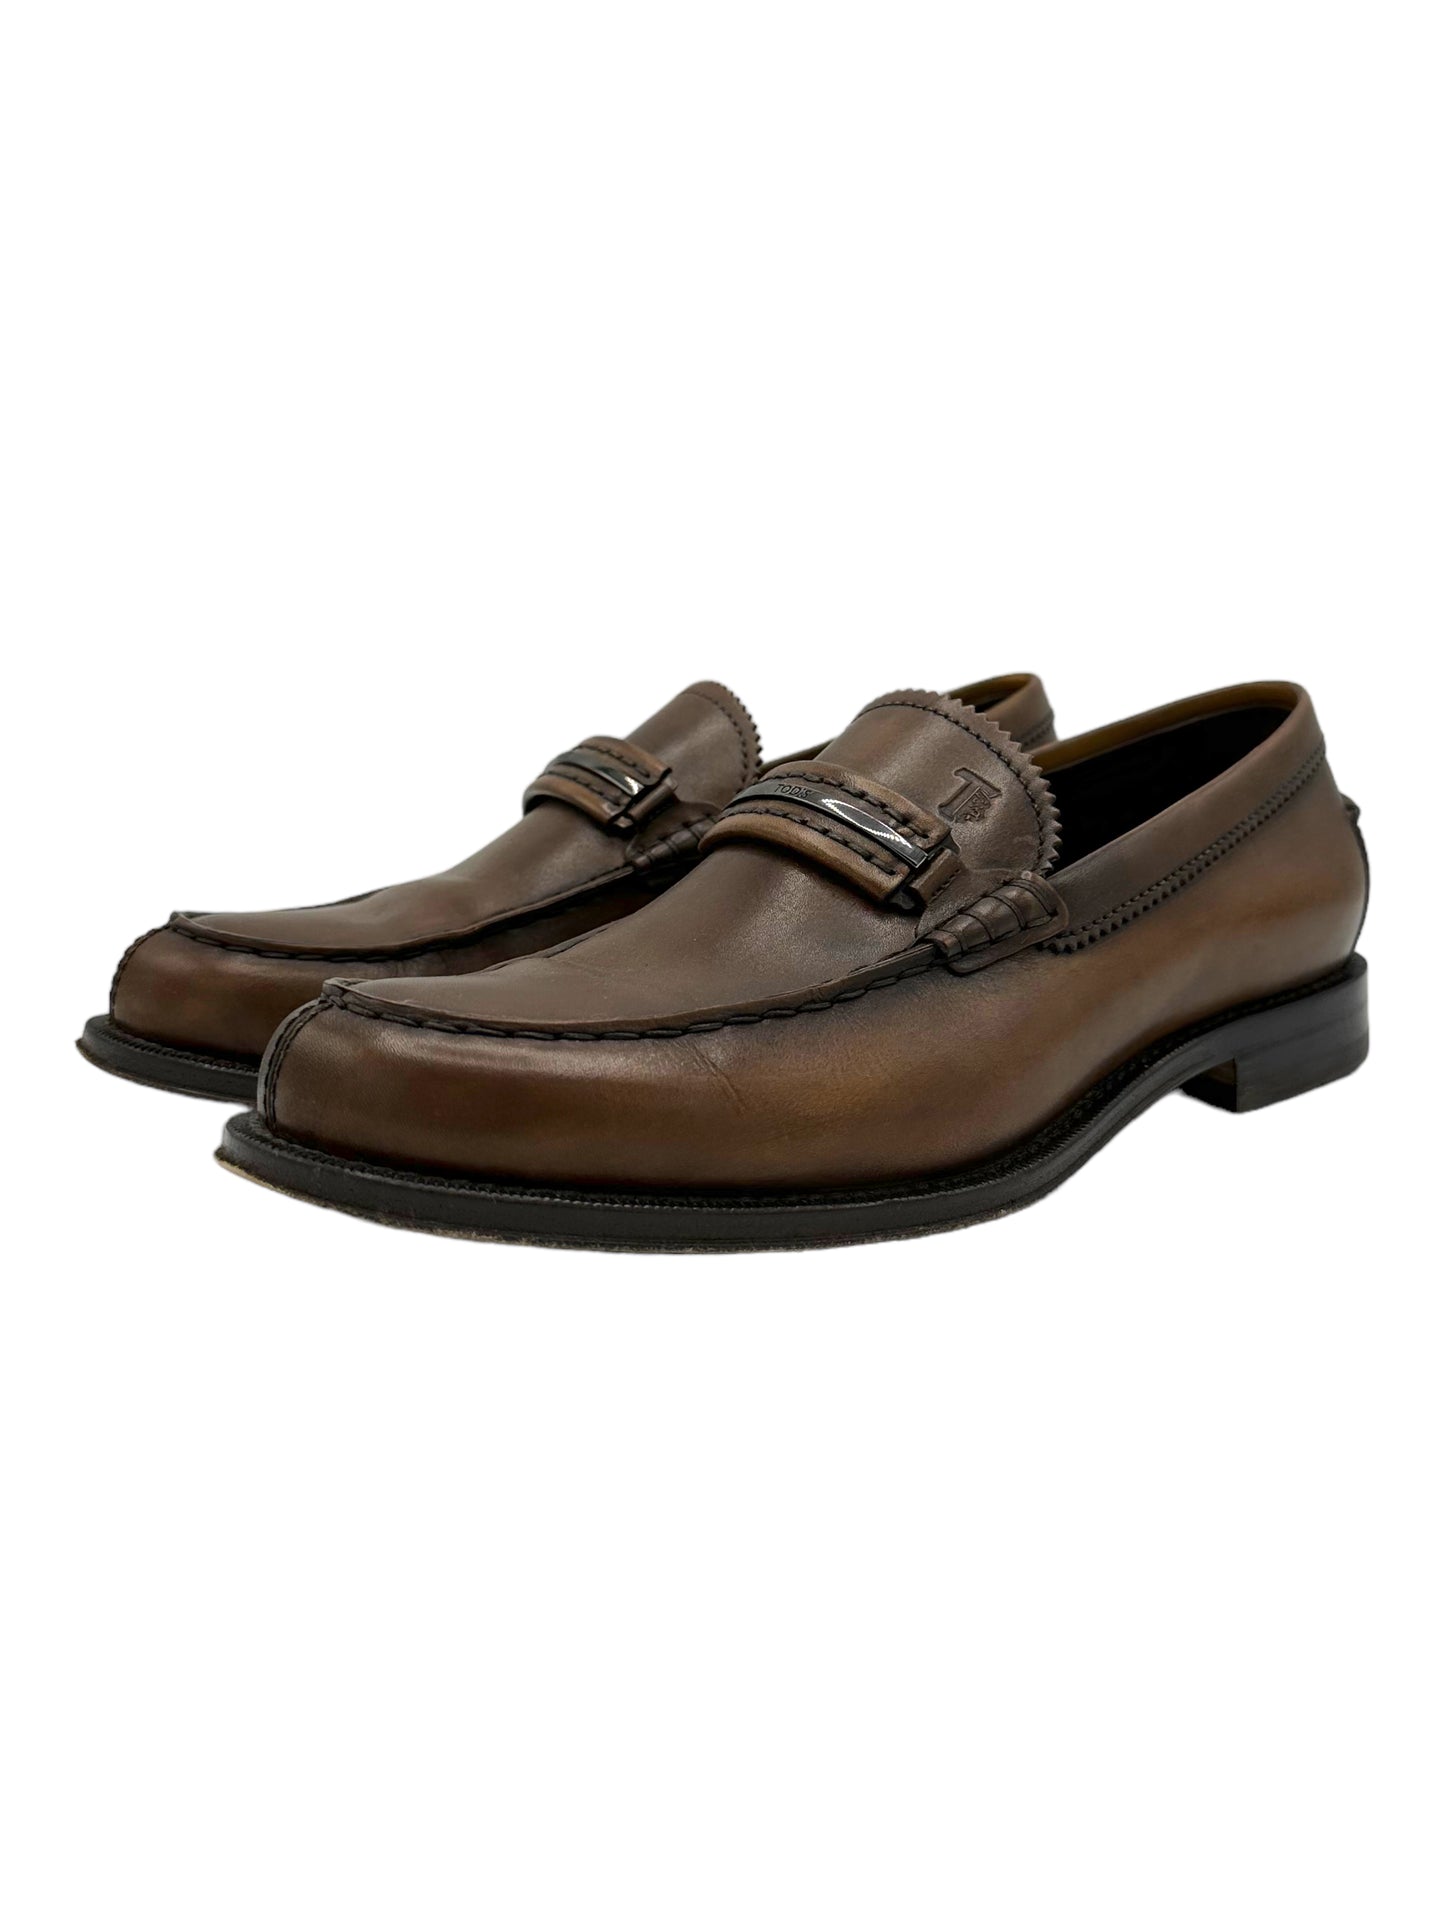 Tods Dark Brown Horsebit Leather Loafer - Genuine Design Luxury Consignment Calgary, Alberta, Canada New and Pre-Owned Clothing, Shoes, Accessories.